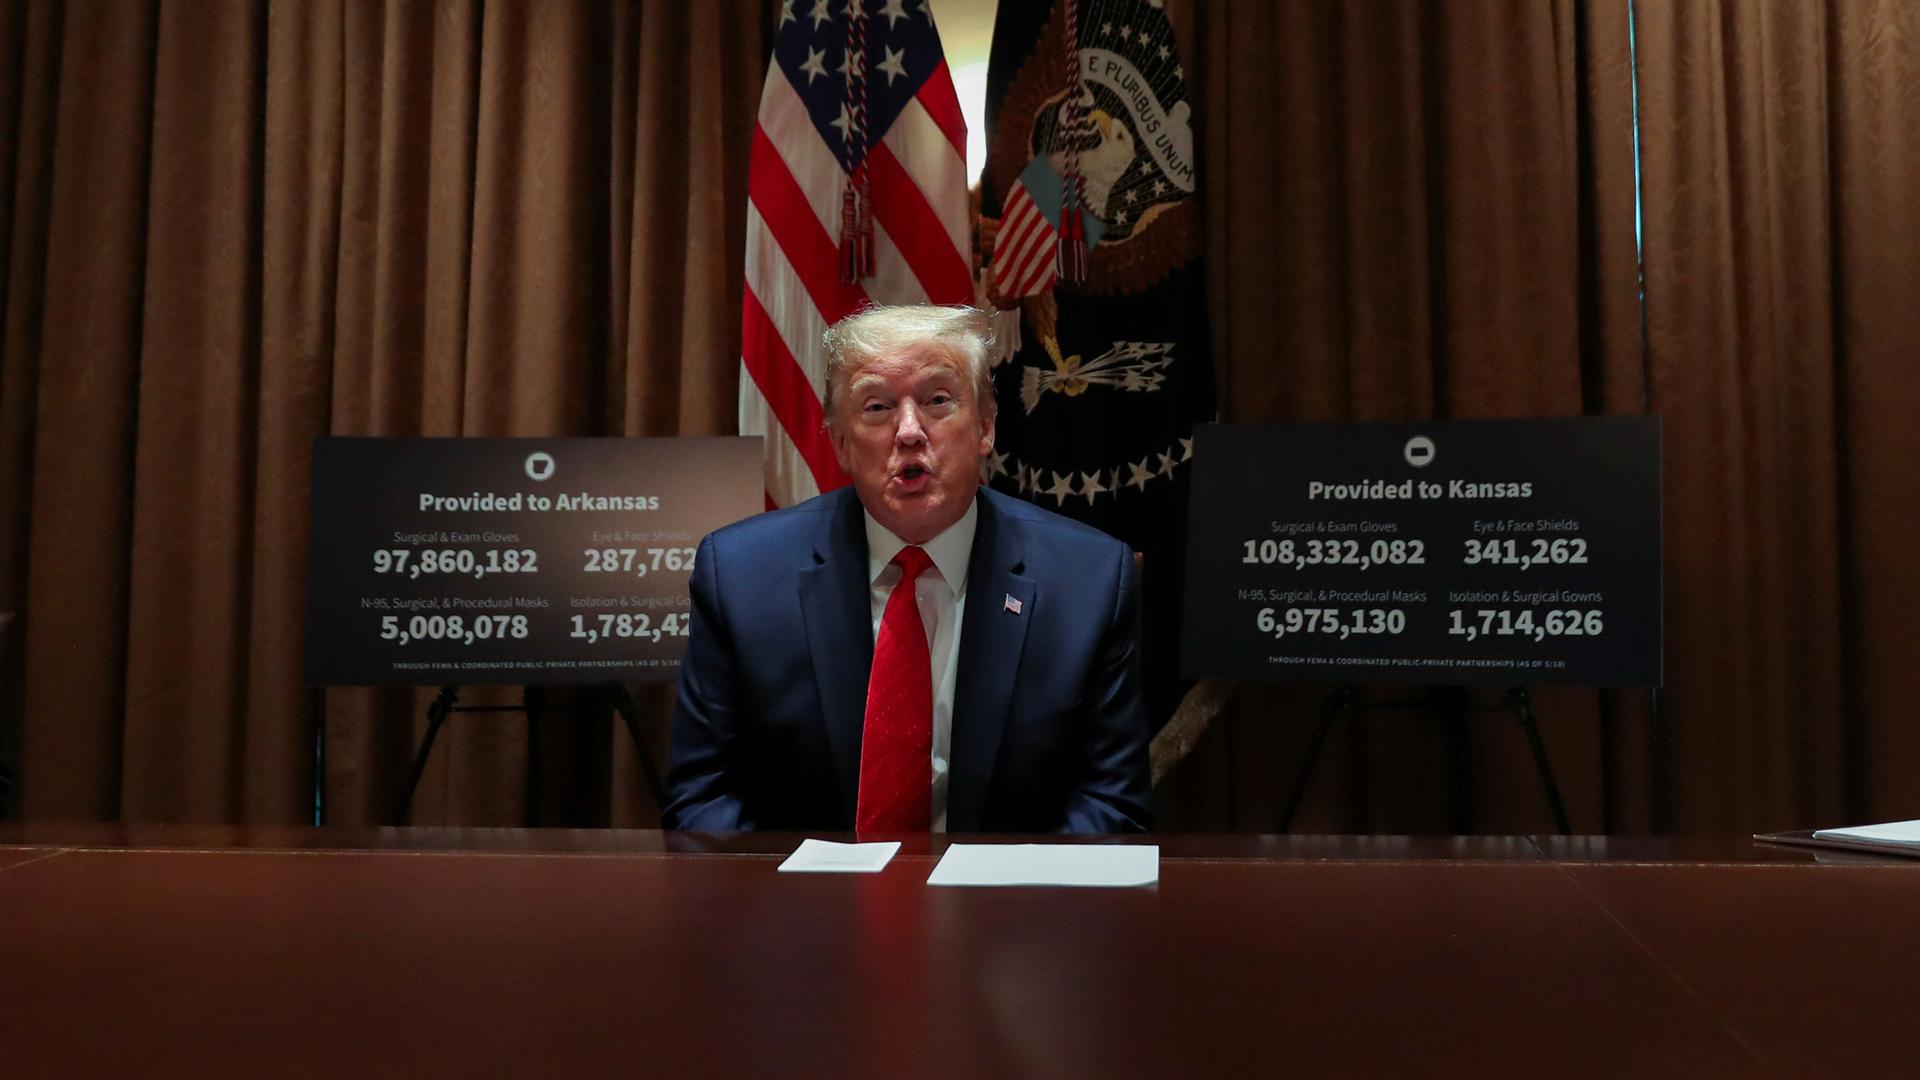 US President Donald Trump is shown sitting at a table wearing a dark suit and red tied with the US flag behind him.